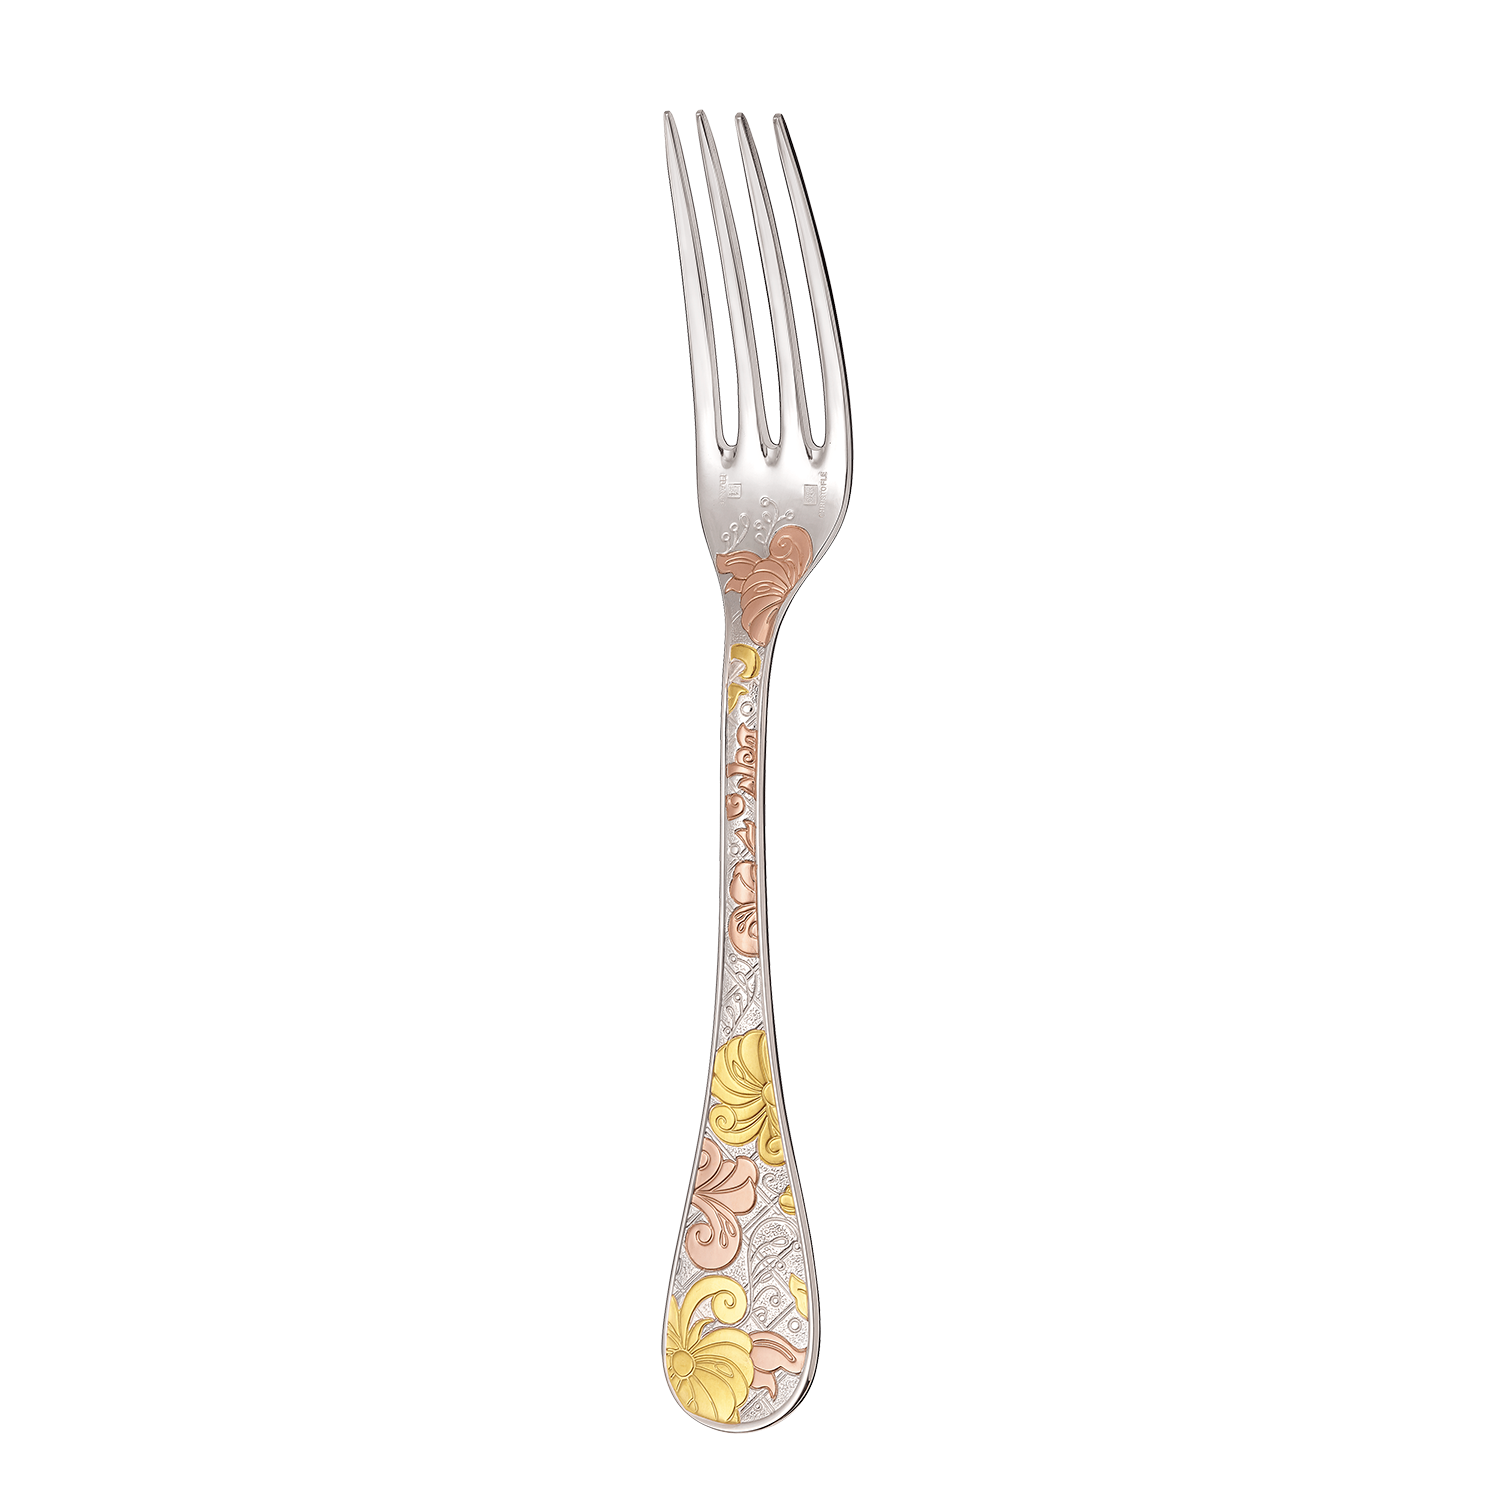 Partially gilded Silver-Plated dinner fork - pink and yellow gold